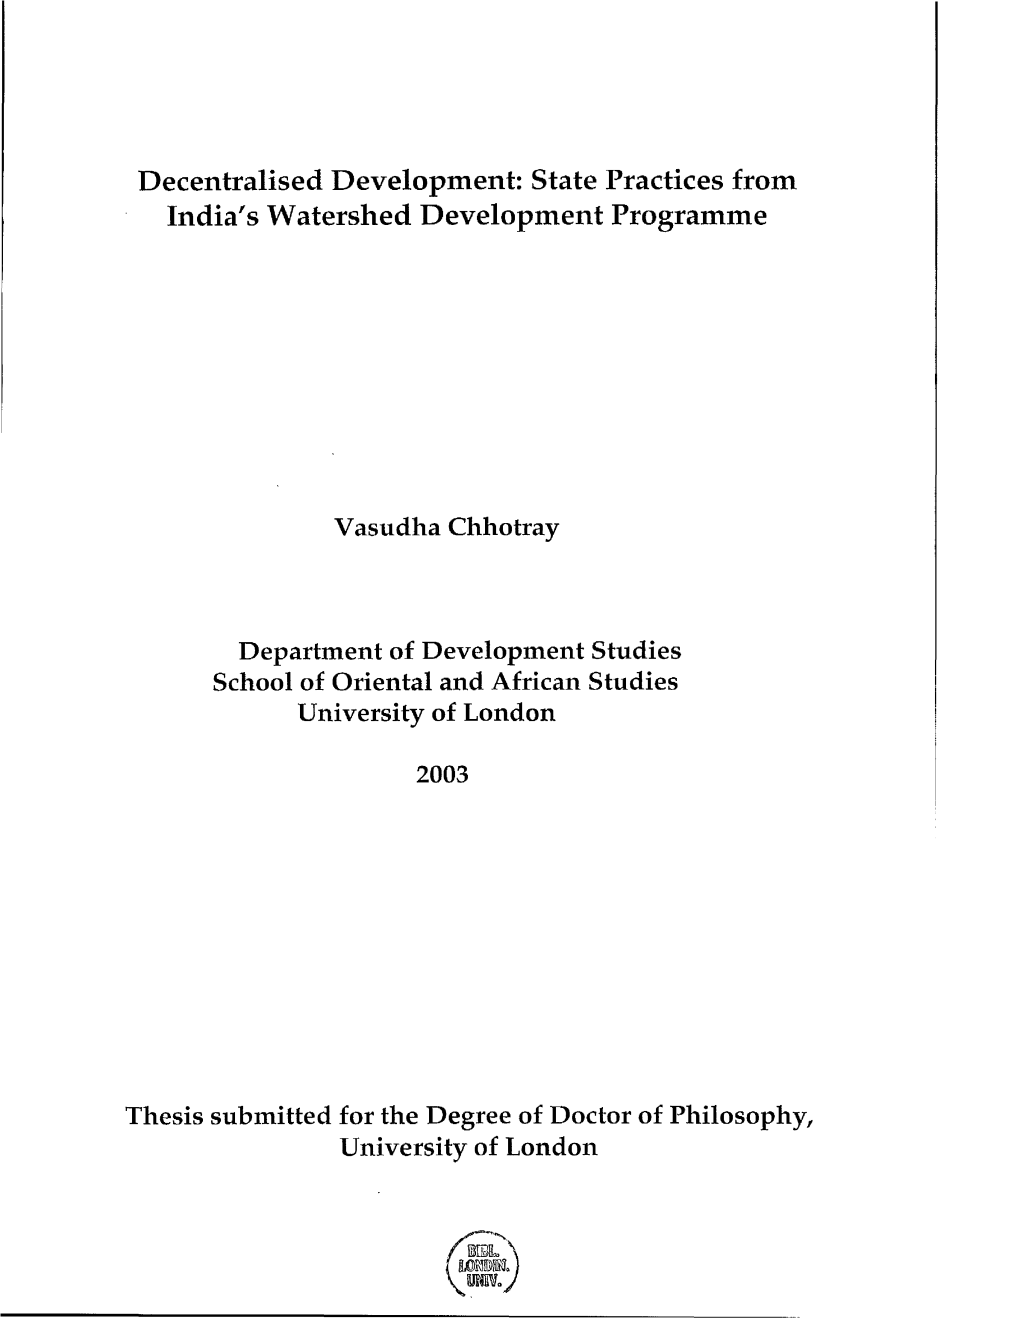 State Practices from India's Watershed Development Programme